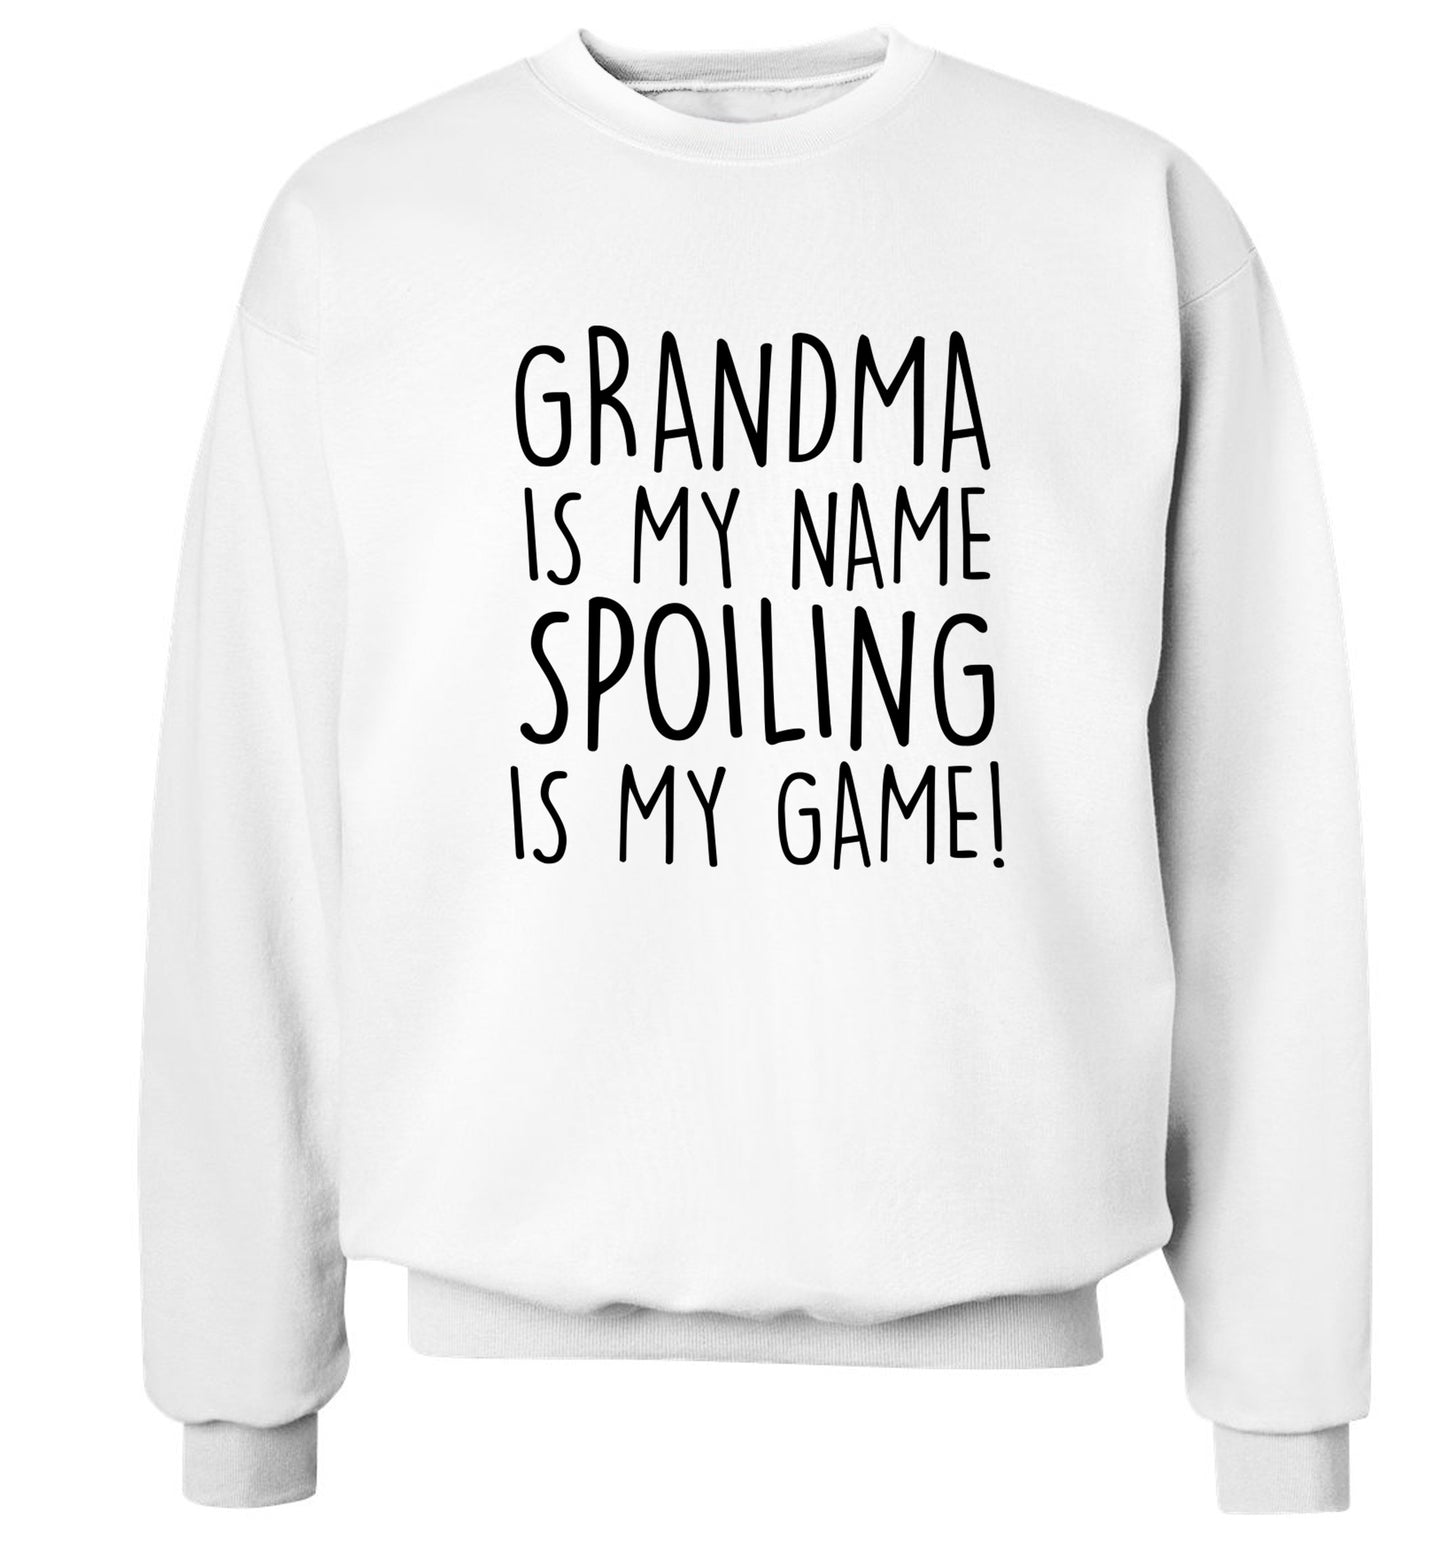 Grandma is my name, spoiling is my game Adult's unisex white Sweater 2XL